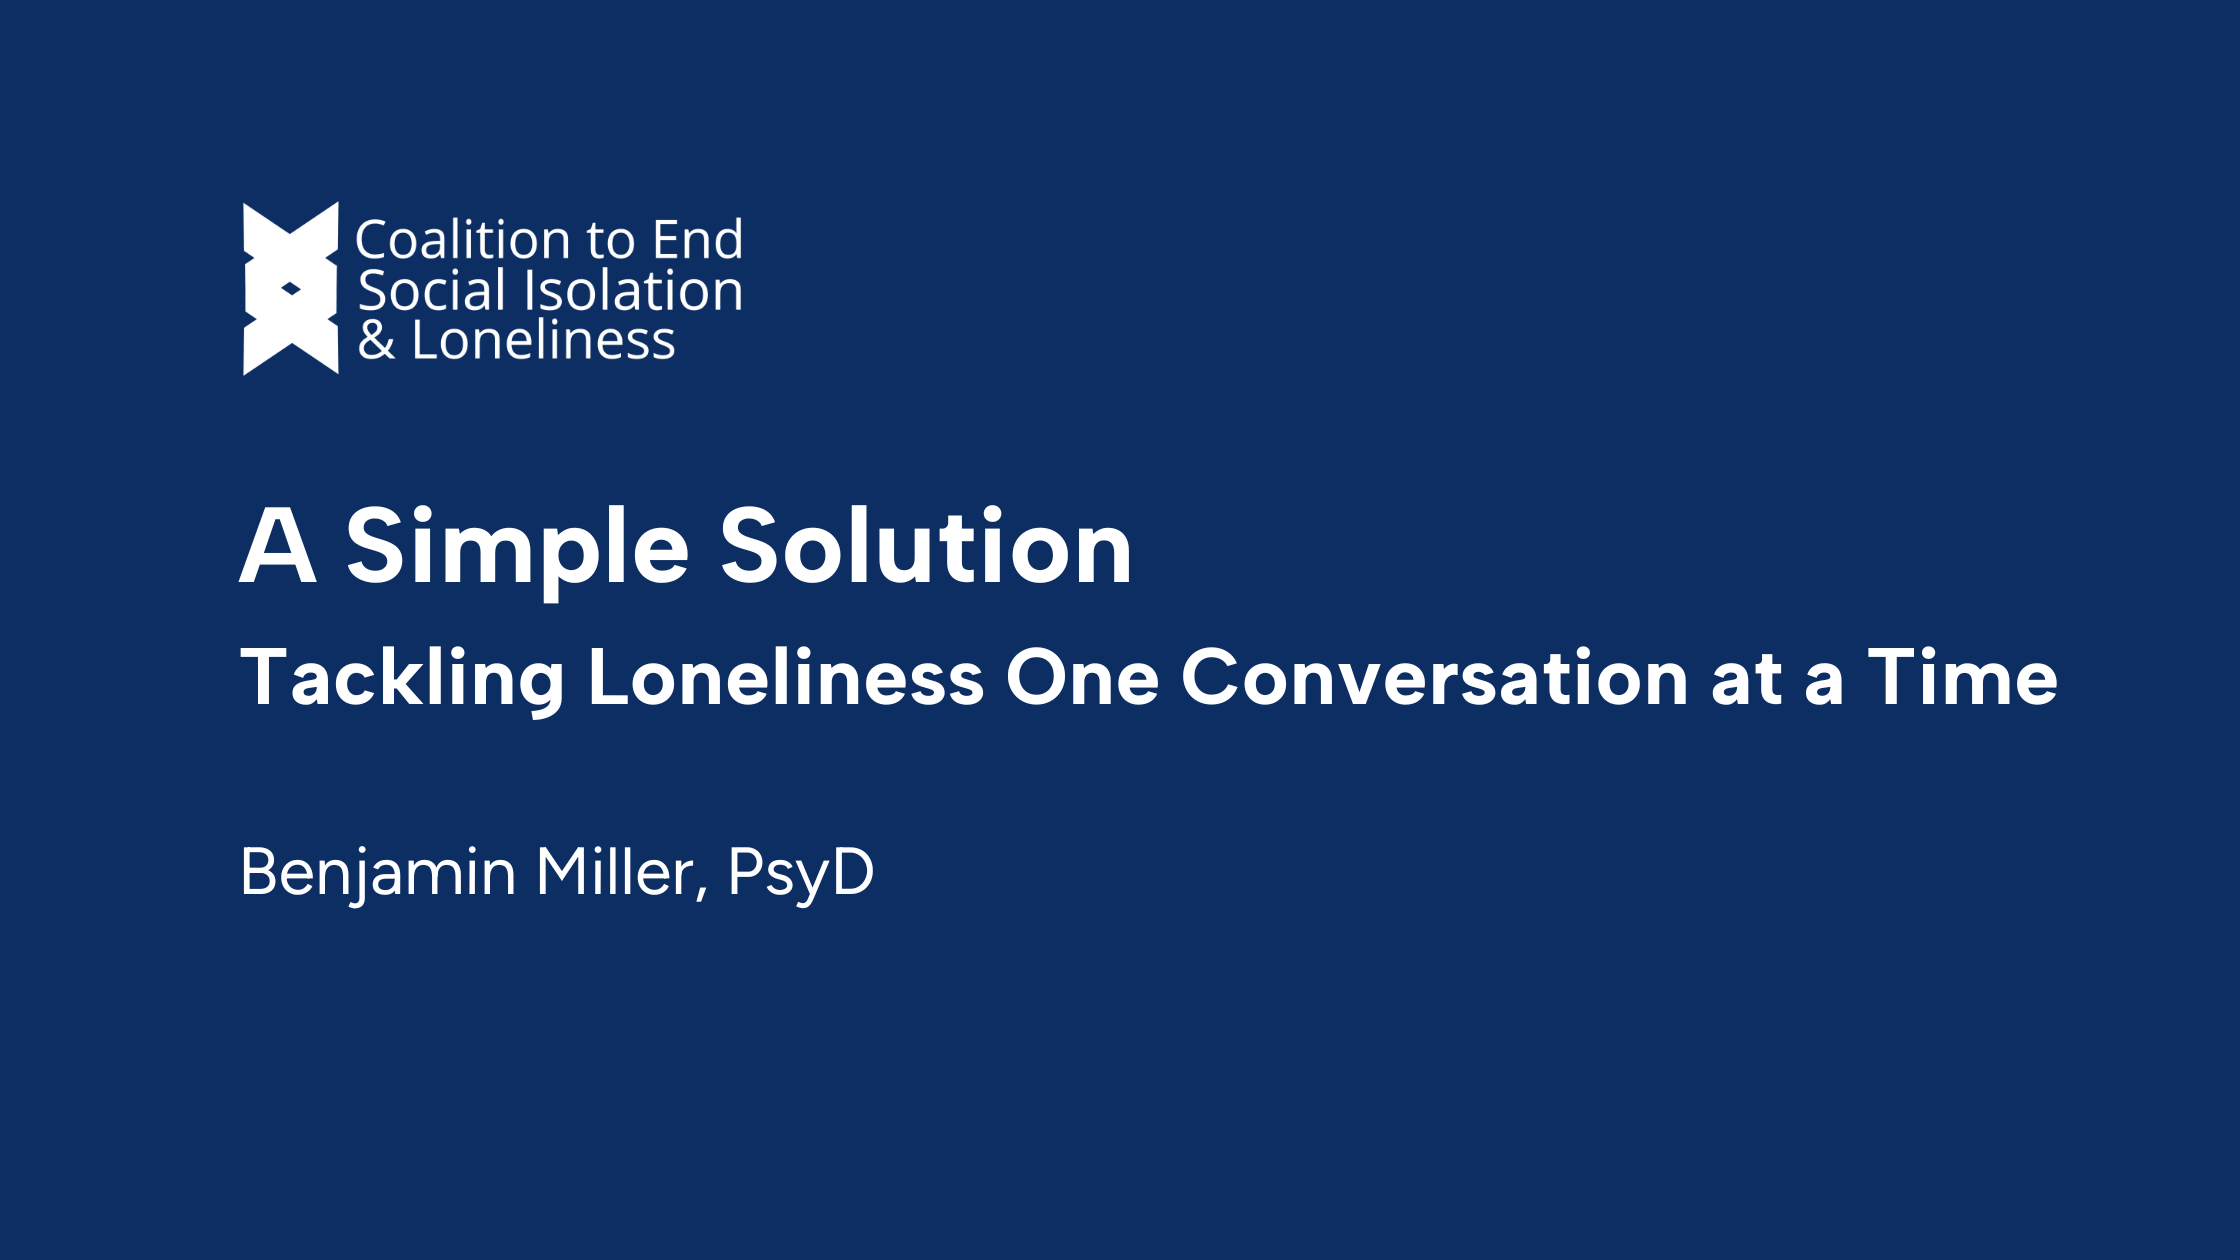 A Simple Solution: Tackling Loneliness One Conversation at a Time